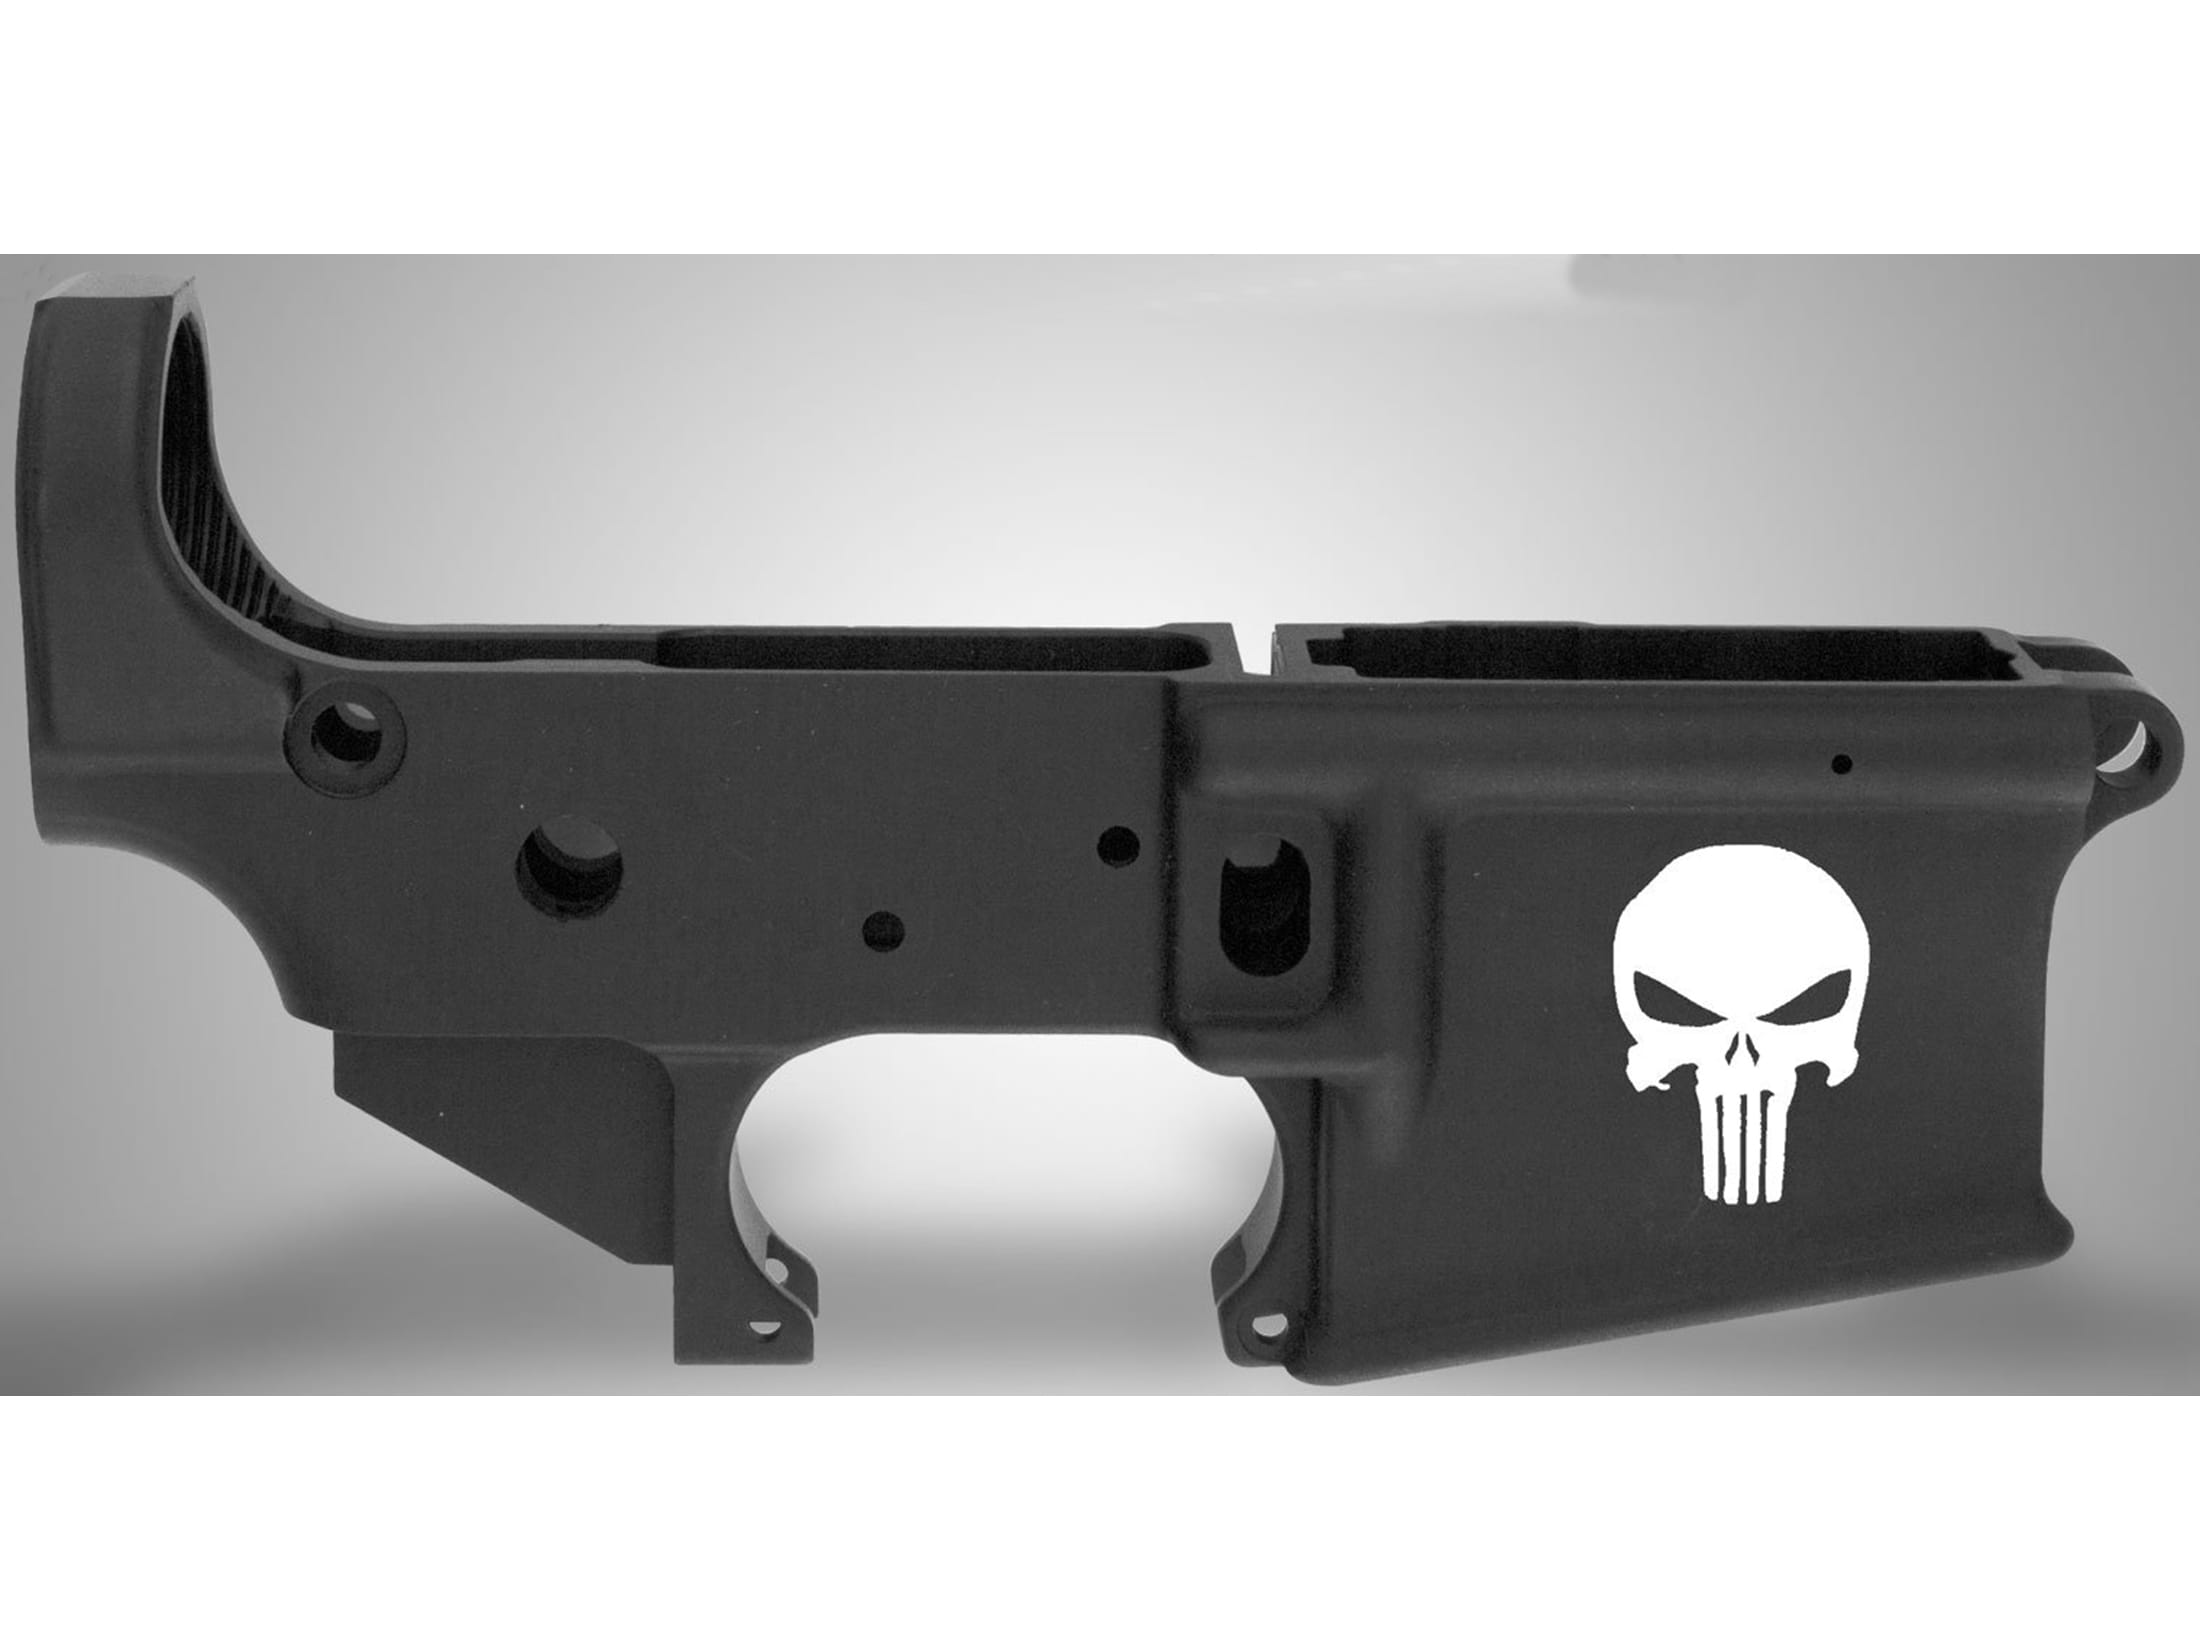 Image of Anderson AM-15 AR-15 Stripped Lower Receiver Punisher Aluminum Black